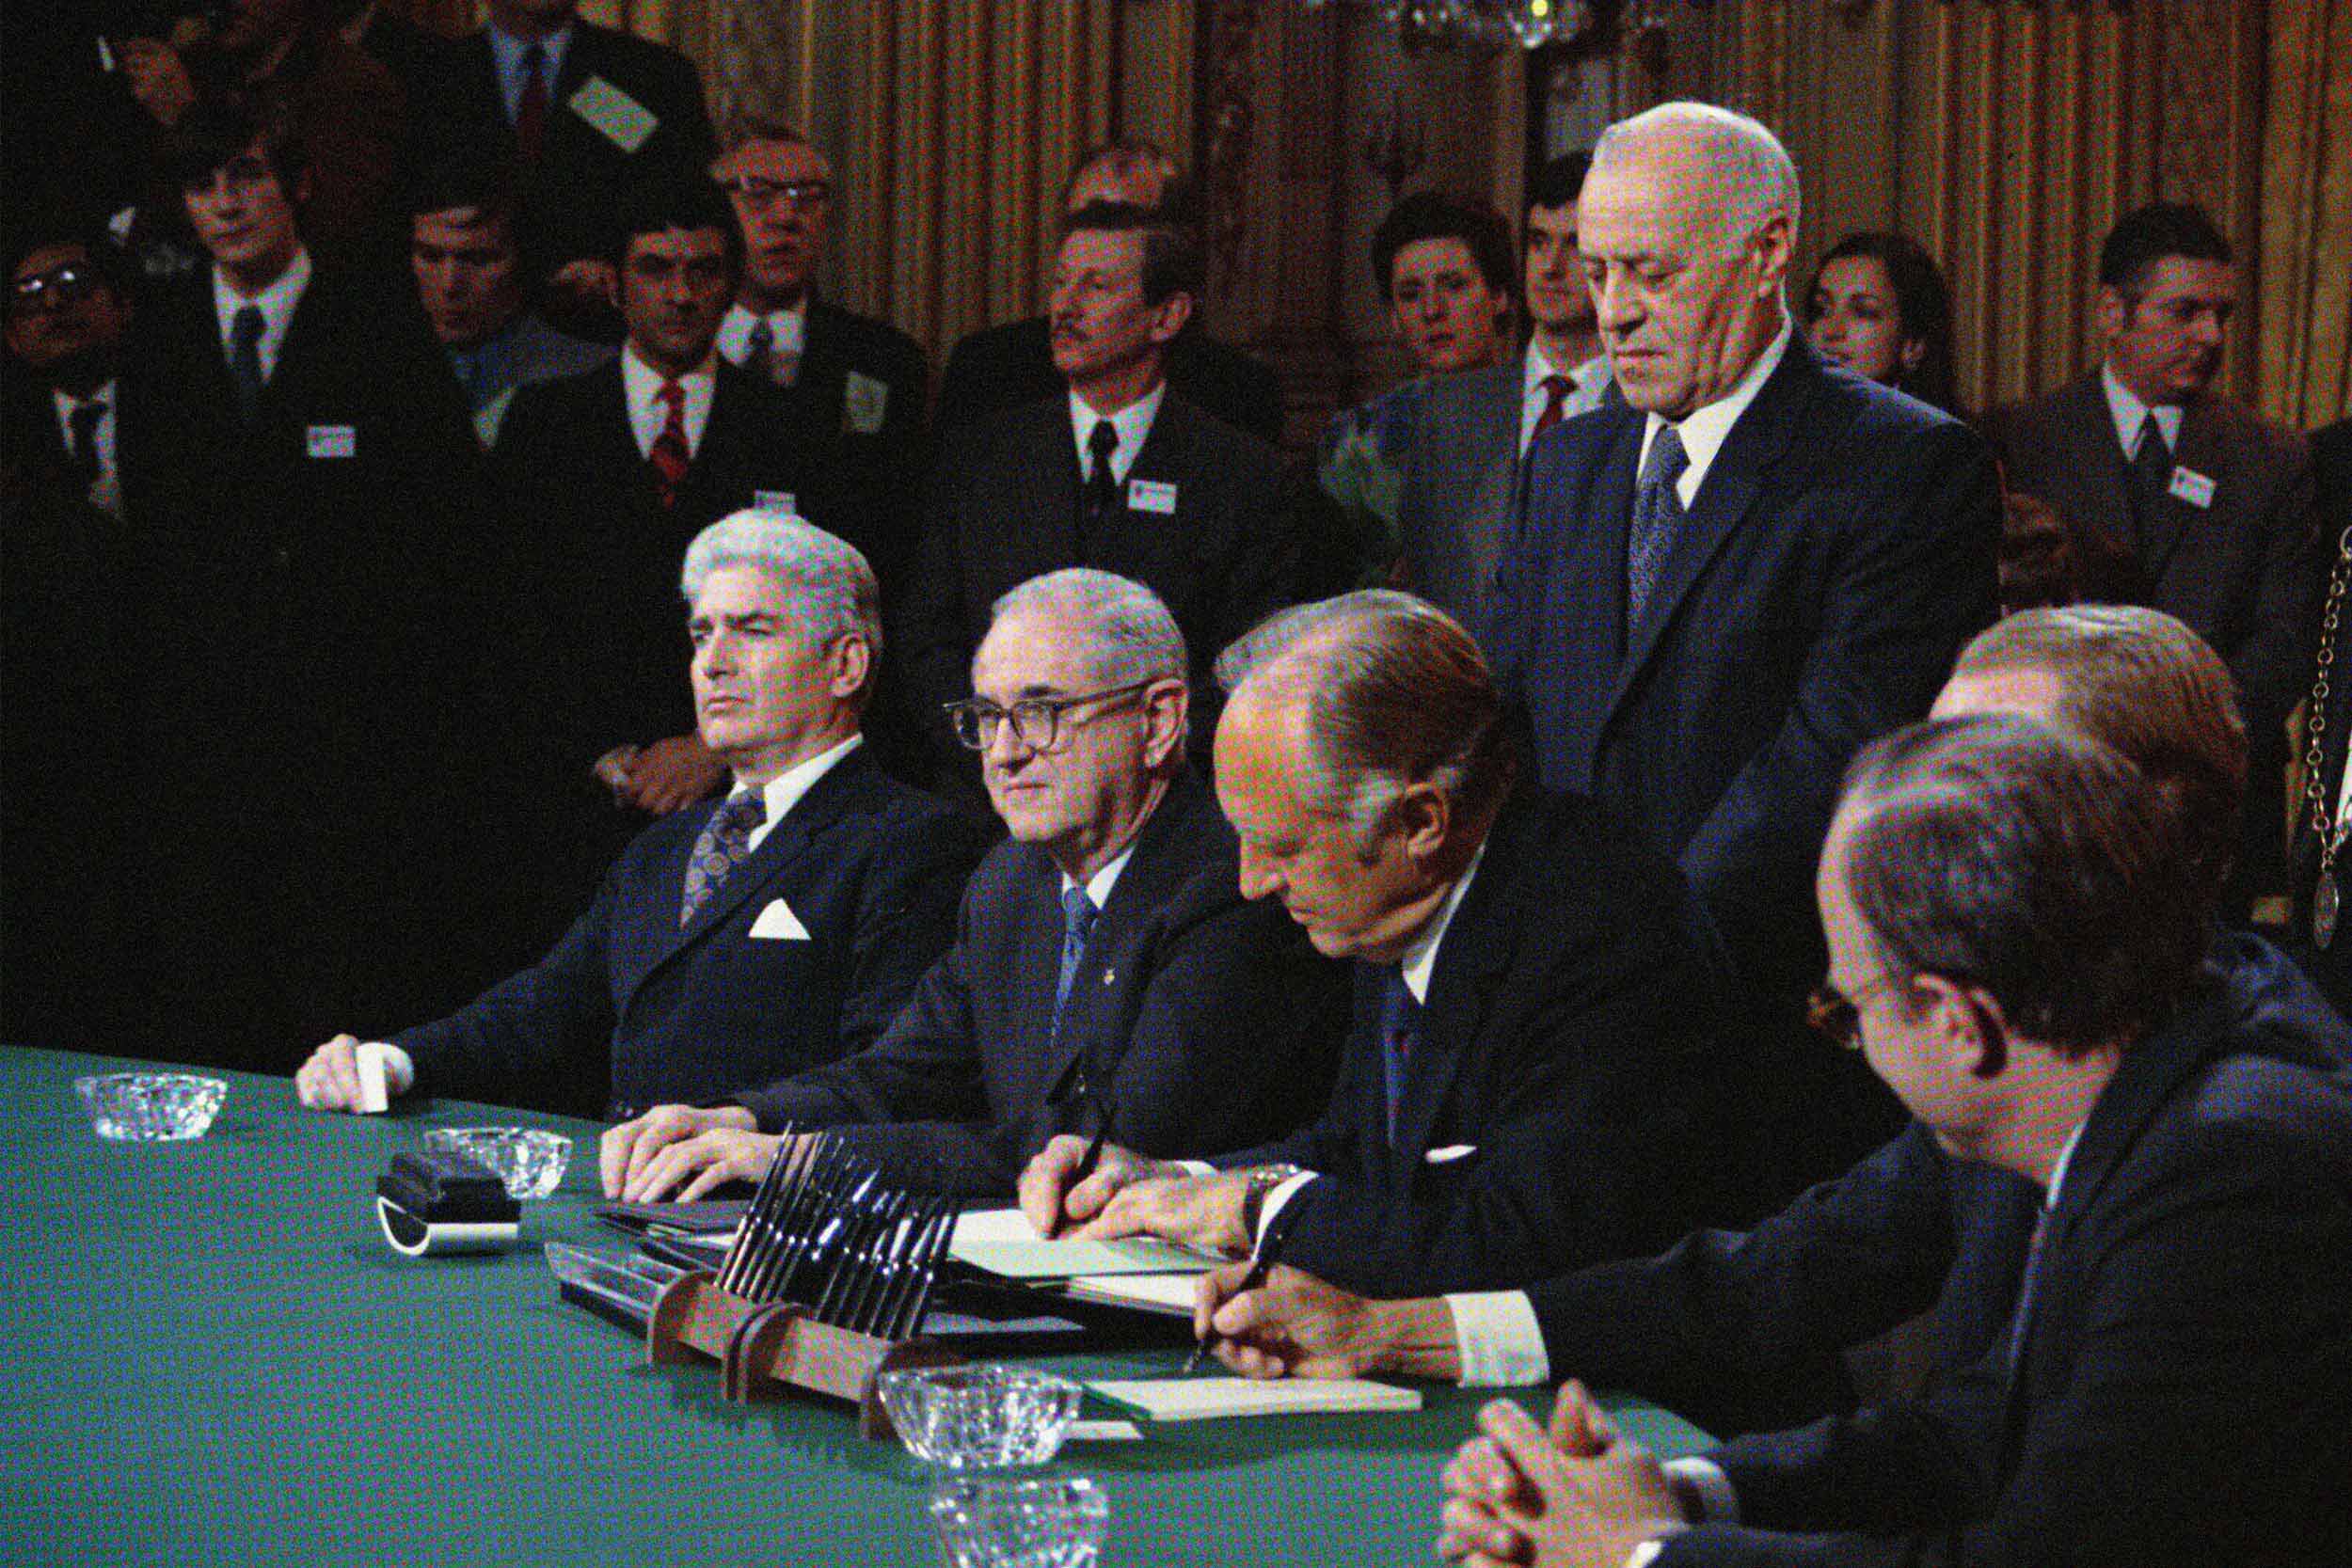 U.S. representatives signing a treaty at a press conference in 1973